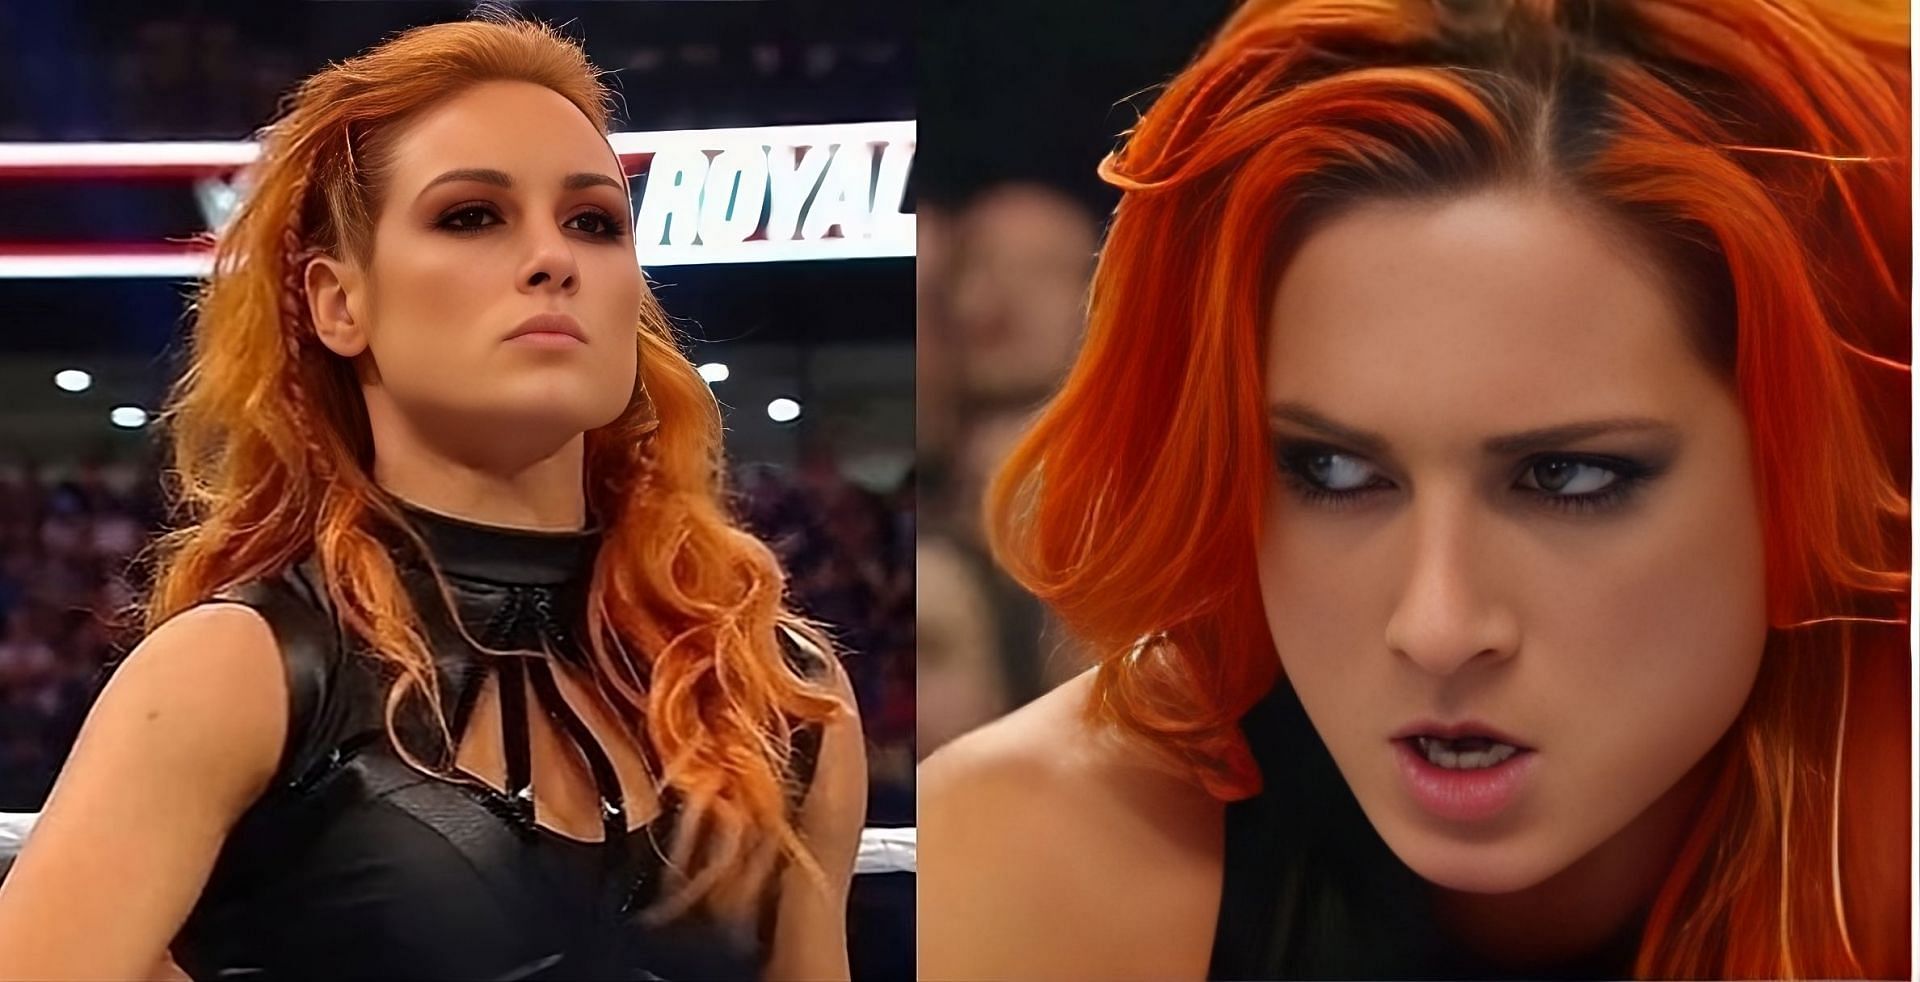 Becky Lynch is the current NXT Women